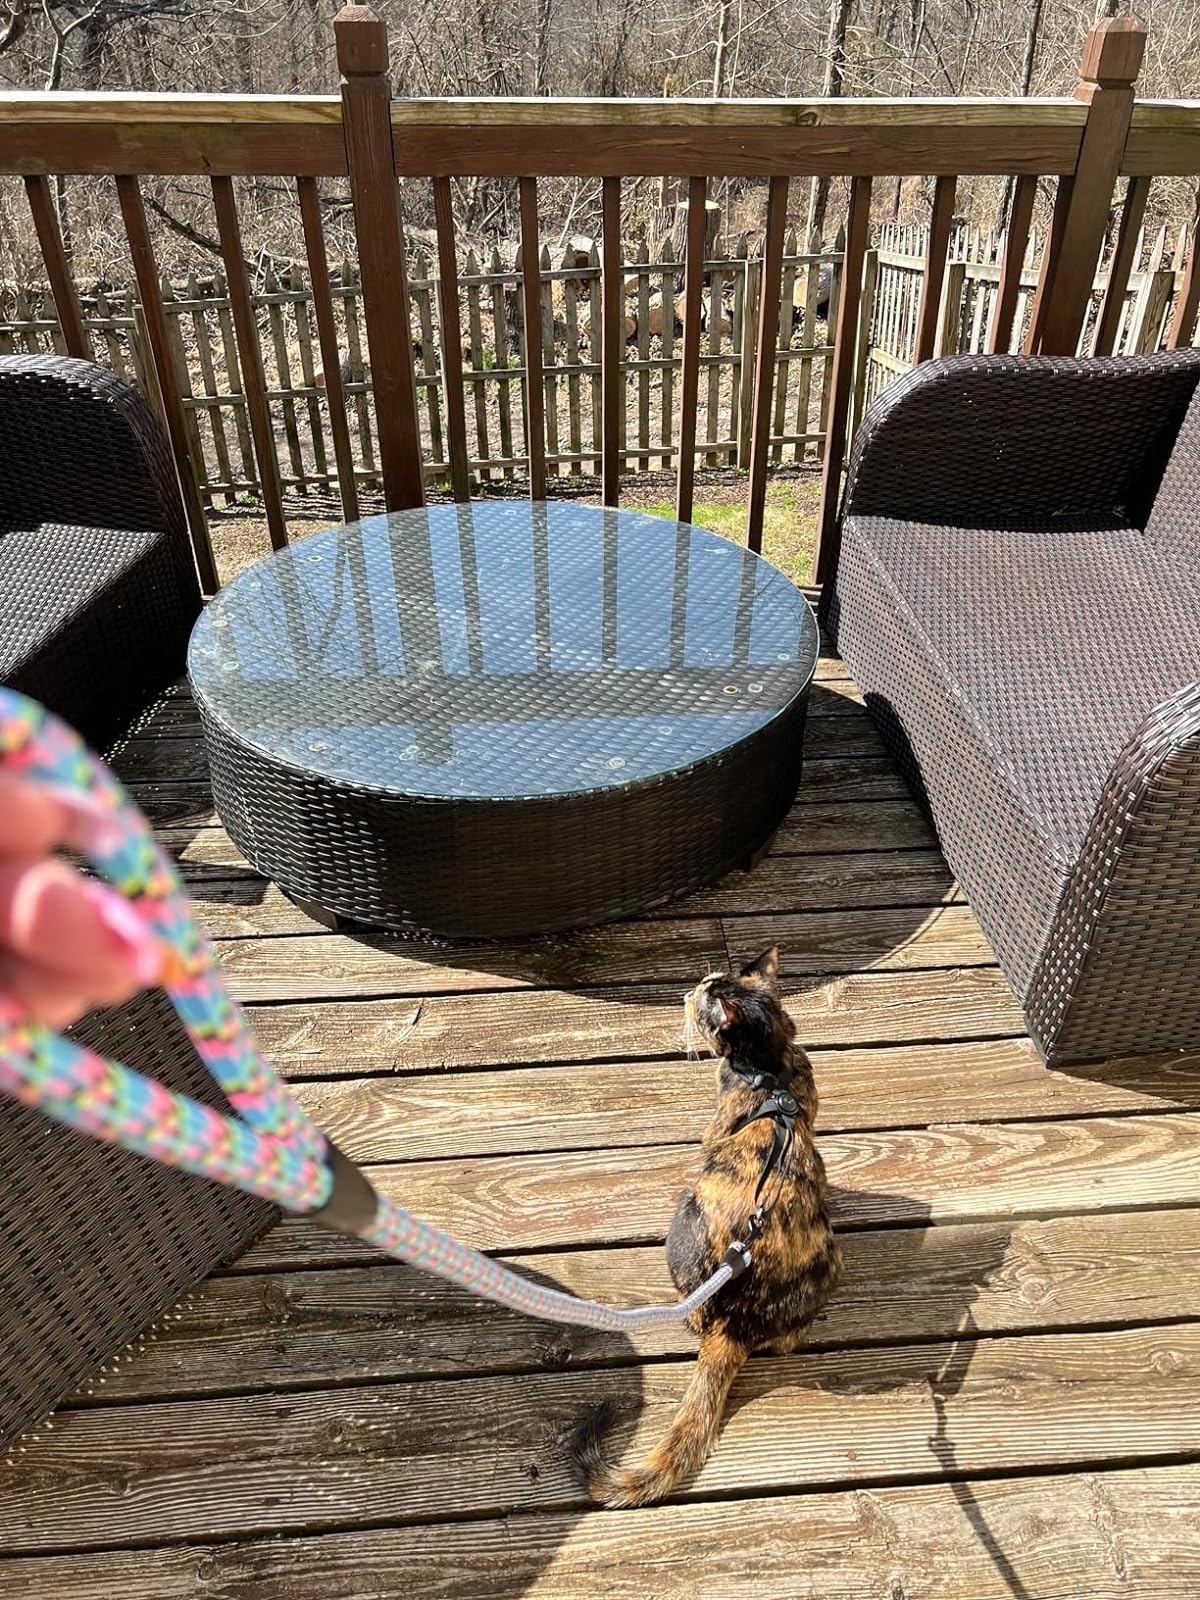 Person on a deck holding a leash attached to a cat looking outwards, near patio furniture